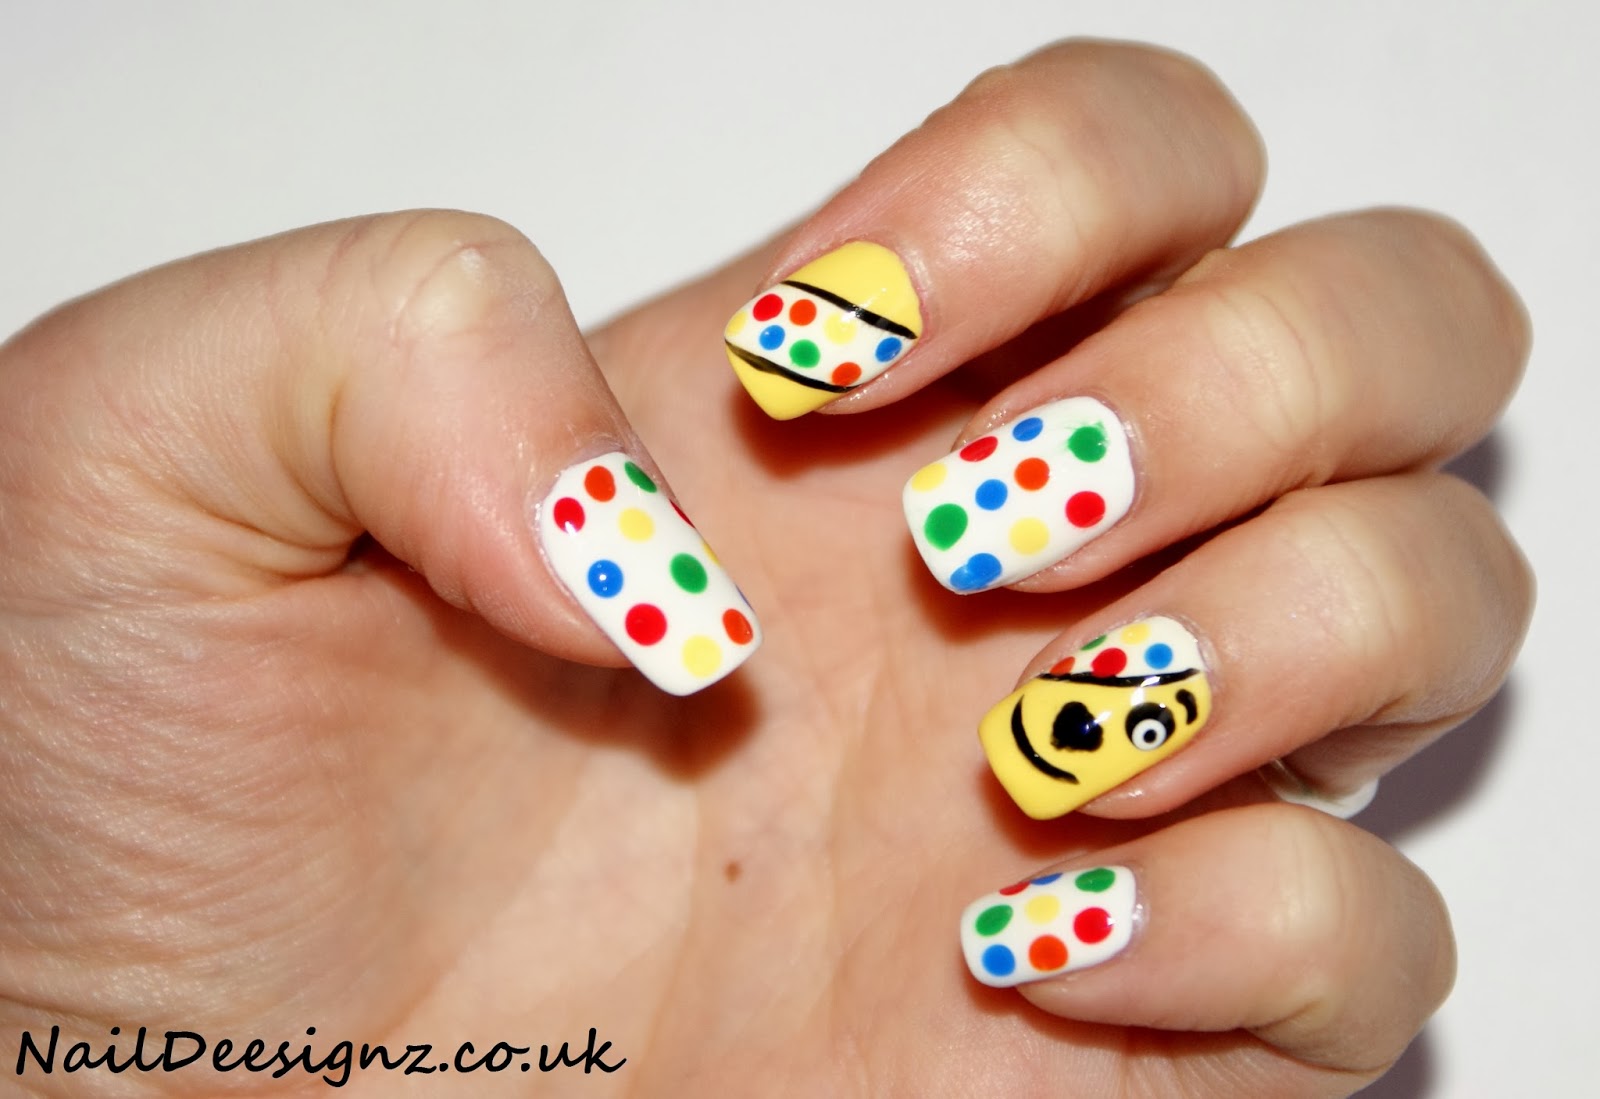 1. Nail Art for Kids: 10 Easy Ideas to Get You Started - wide 9